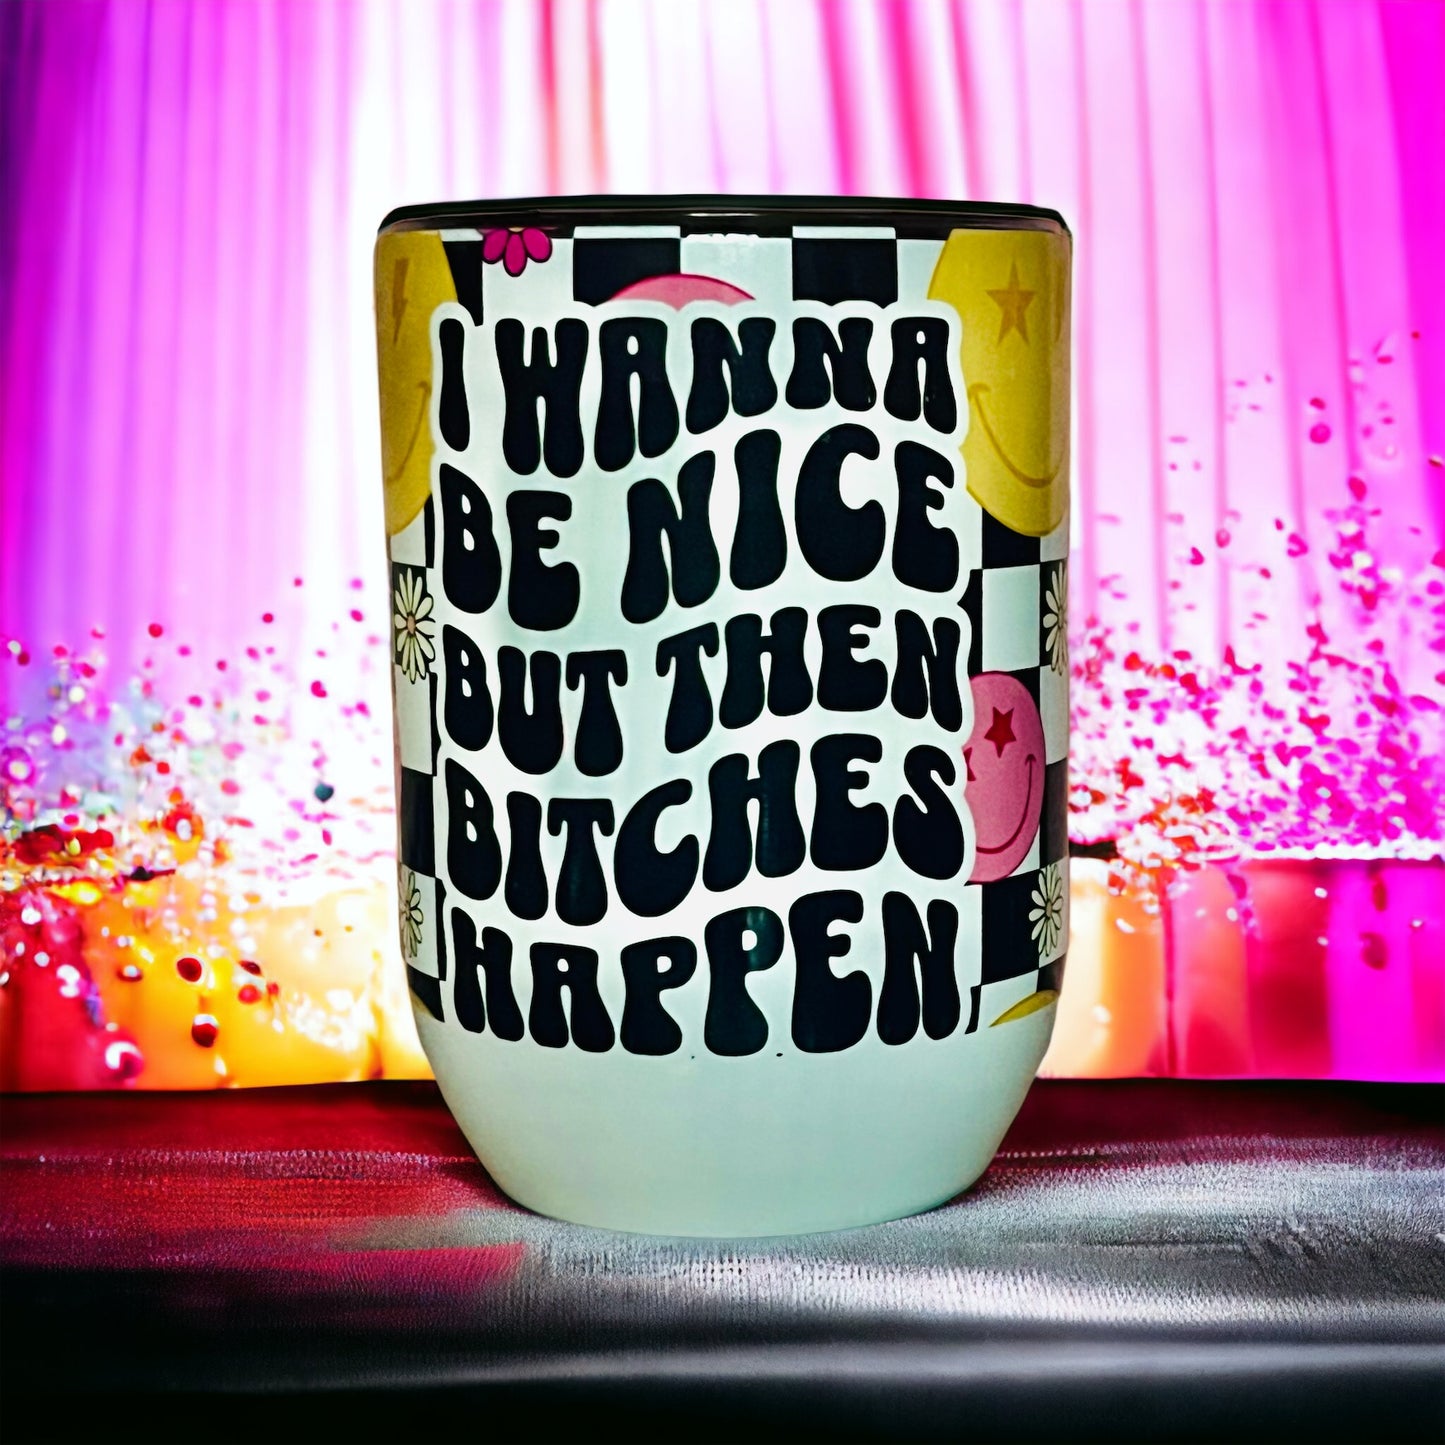 “I Wanna Be Nice, But Then Bitches Happen” Stainless Steel Wine Tumbler - 12oz